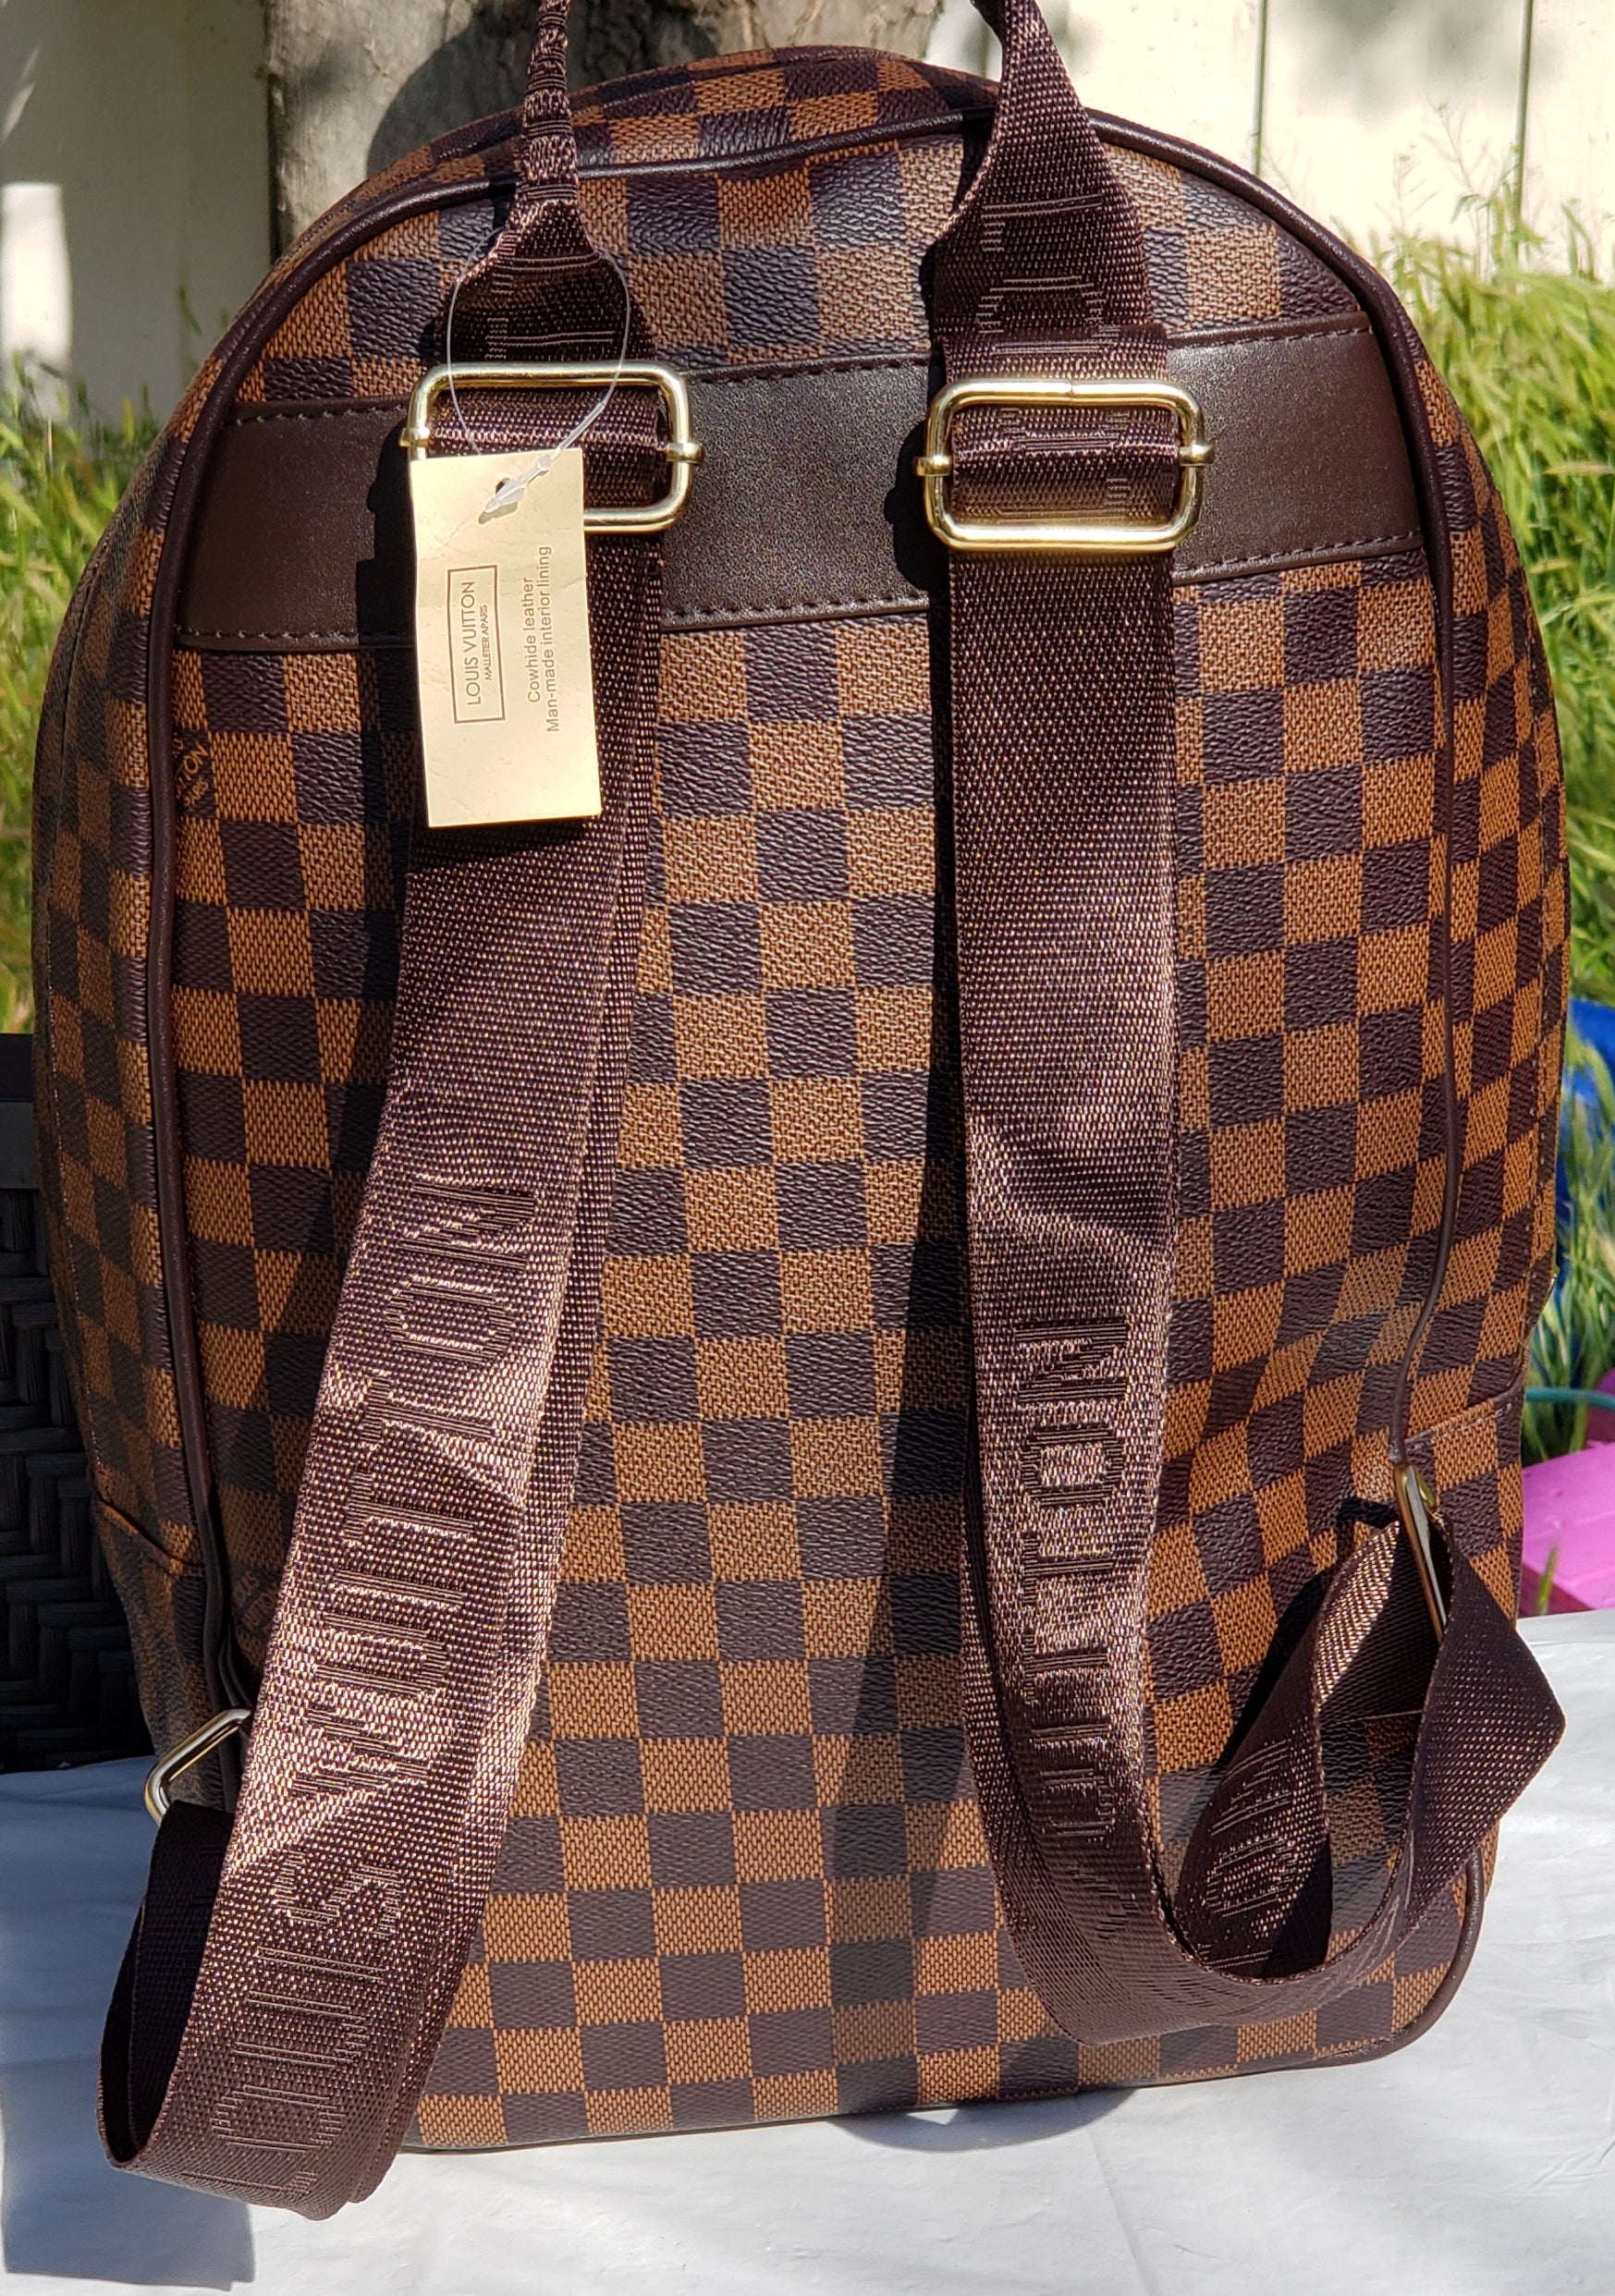 Lumento Womens Brown Checkered Backpack With Inner Pouch - PU